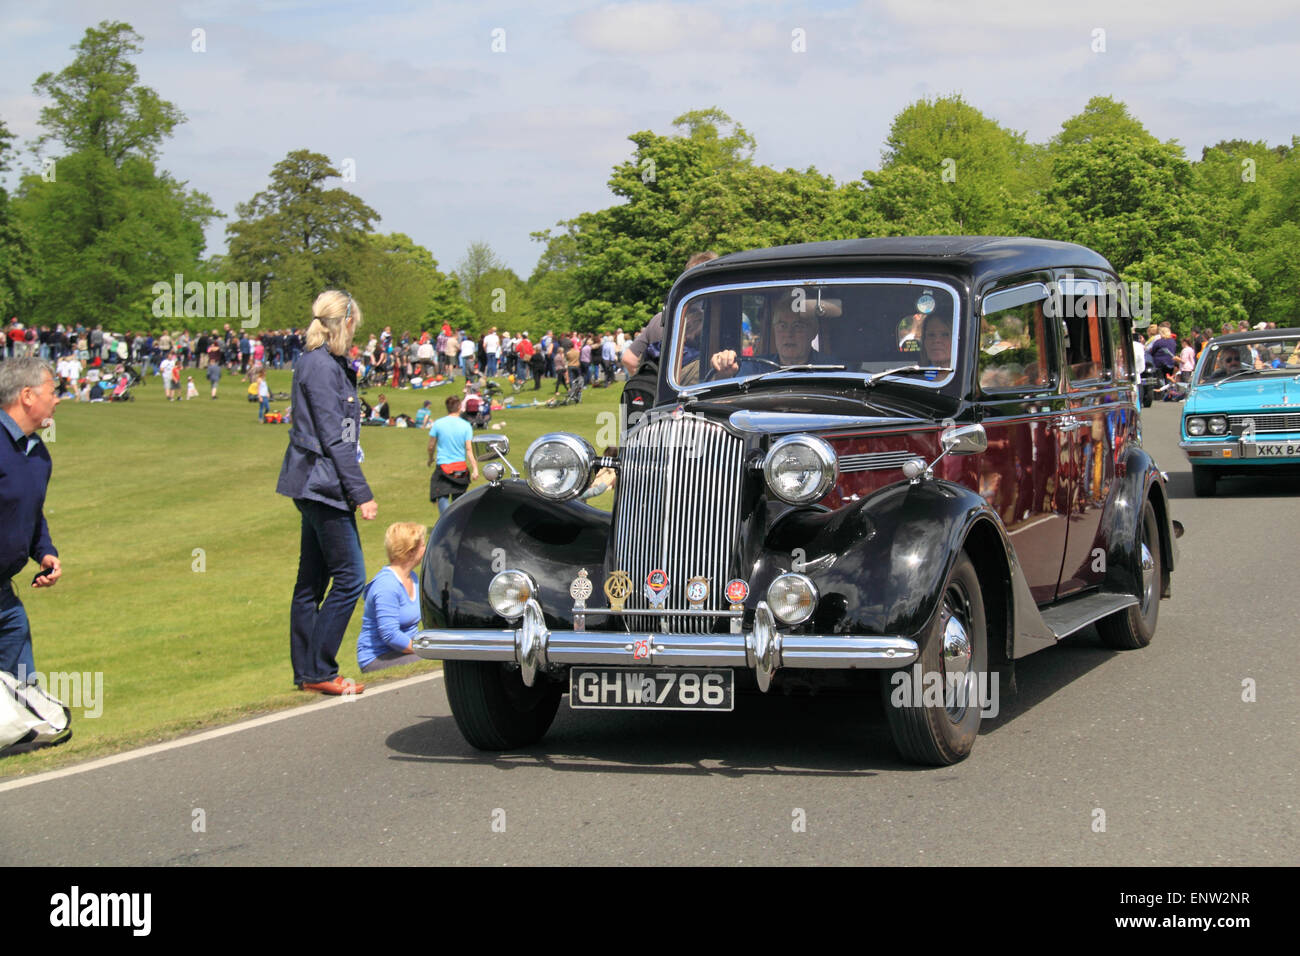 Vauxhall 25 HP GL-Type (1940). Chestnut Sunday, 10th May 2015. Bushy Park, Hampton Court, London Borough of Richmond, England, Great Britain, United Kingdom, UK, Europe. Vintage and classic vehicle parade and displays with fairground attractions and military reenactments. Credit:  Ian Bottle / Alamy Live News Stock Photo